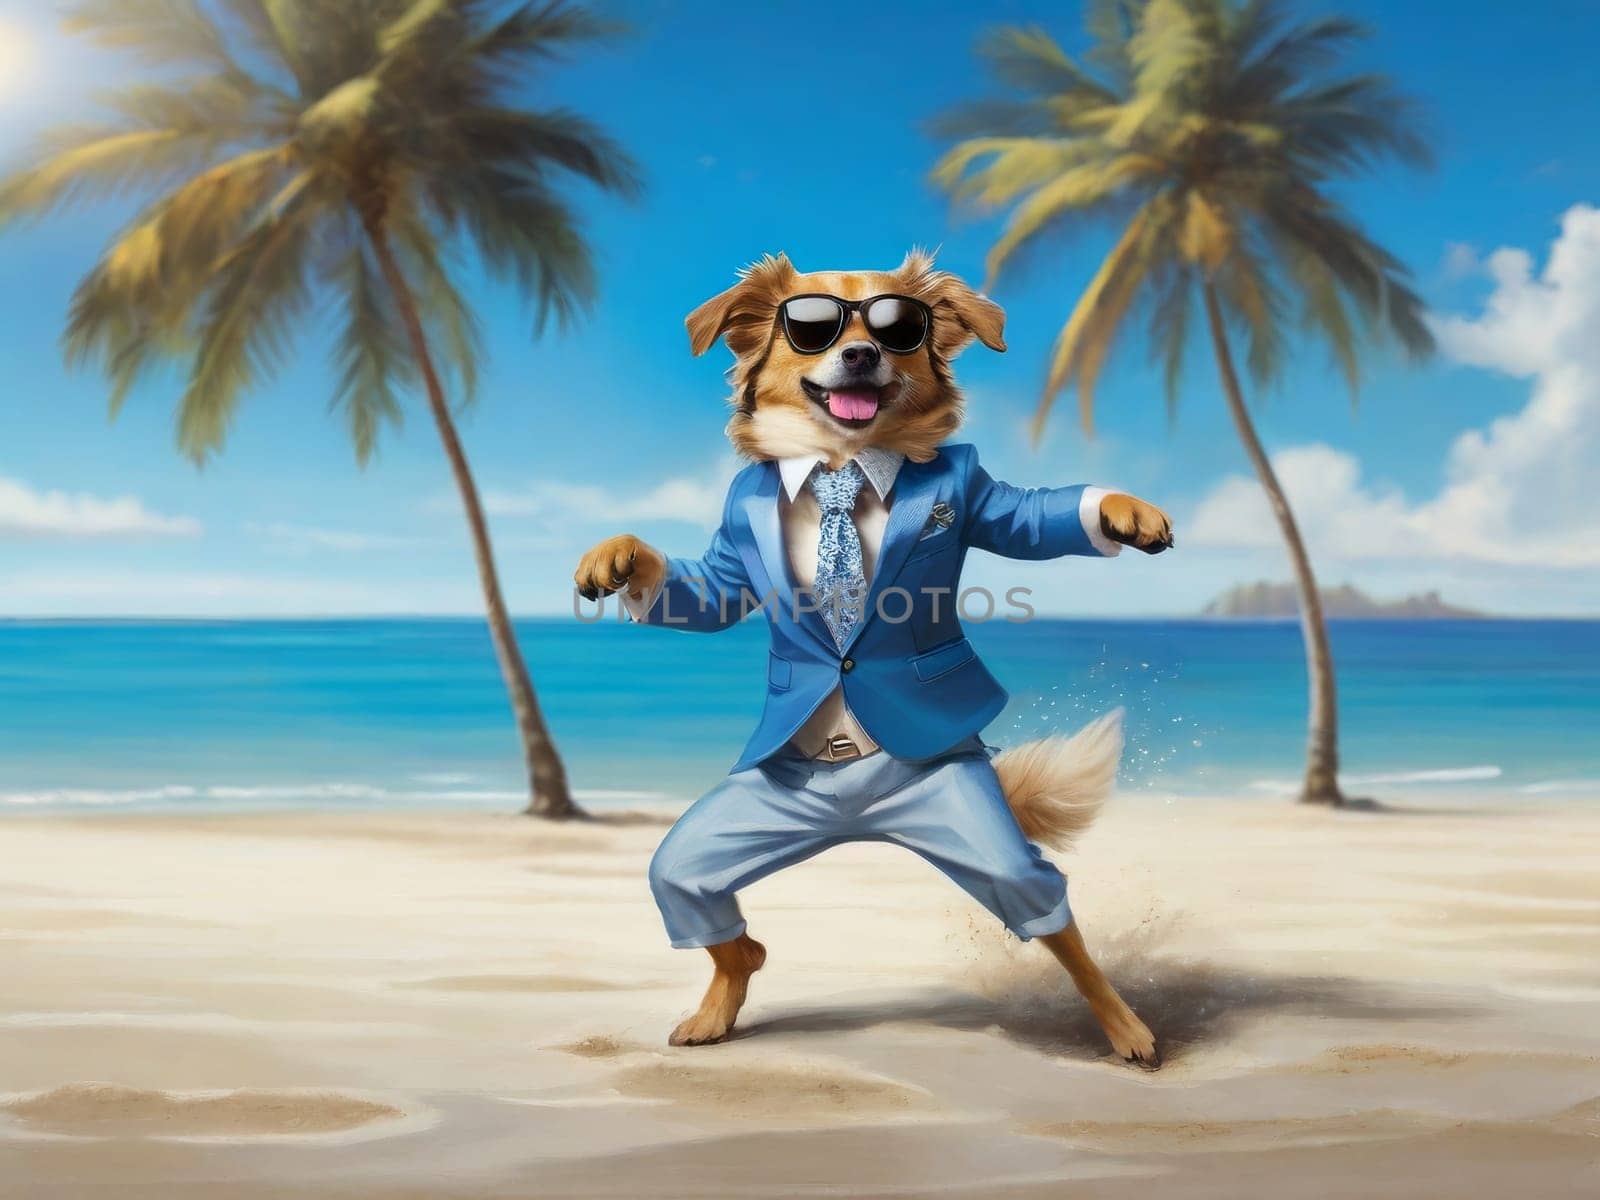 Summer dog character in a bright suit, hat and sunglasses dances on the beach by the sea. illustration with glamorous cartoon cheerful dog on the beach by Ekaterina34